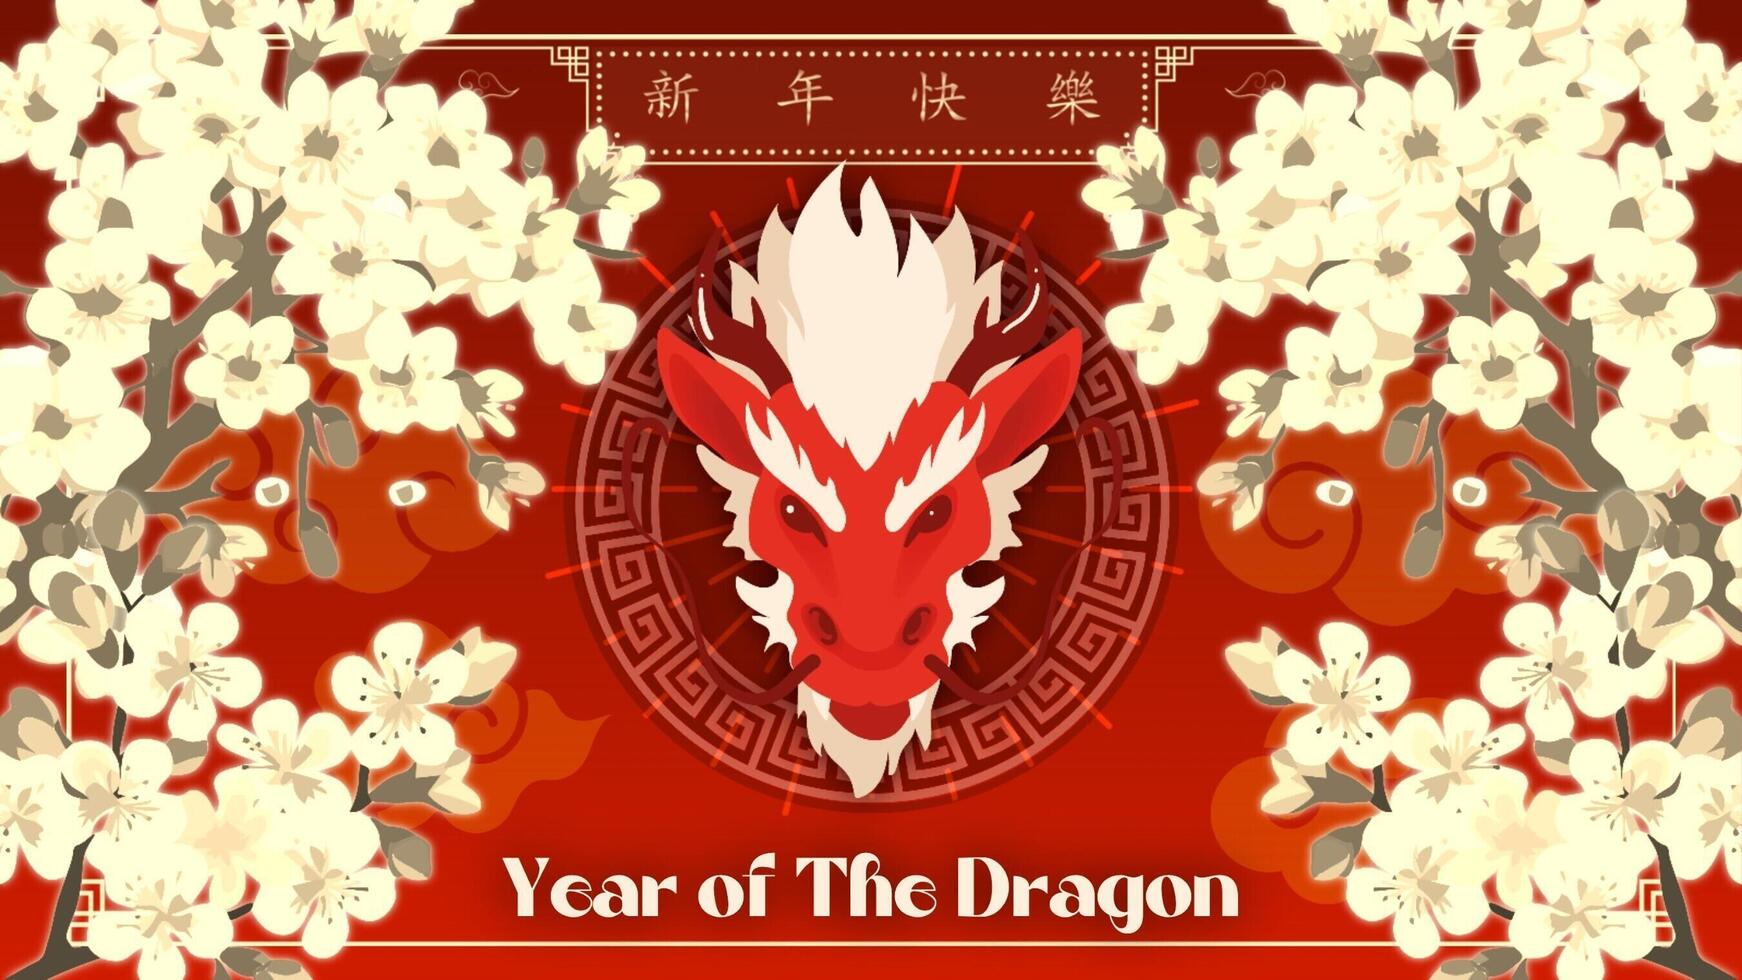 Year of The Dragon Greeting Template for Twitter Post